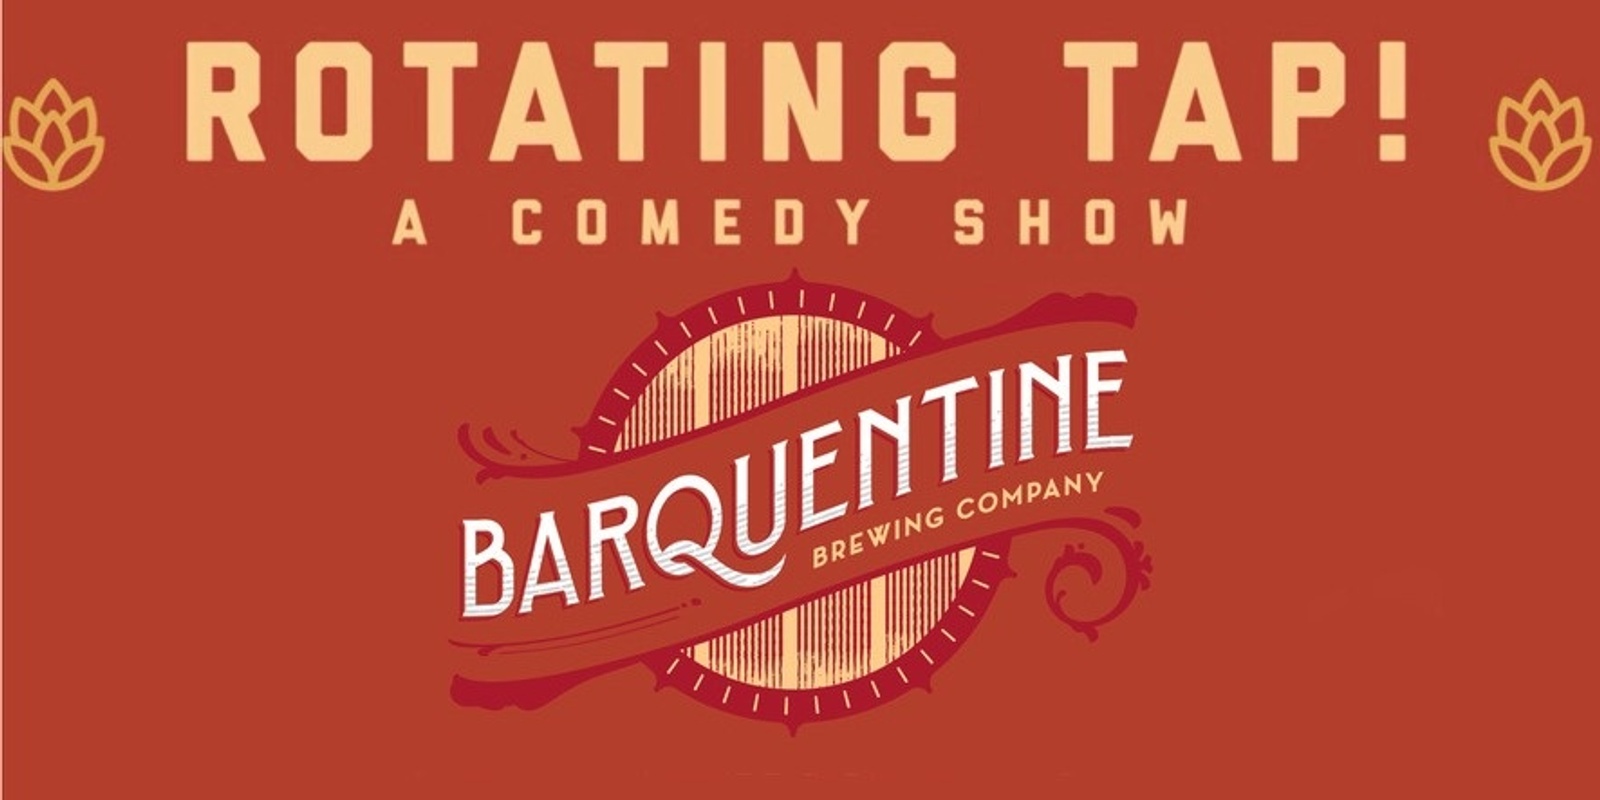 Banner image for Rotating Tap Comedy @ Barquentine Brewing Company